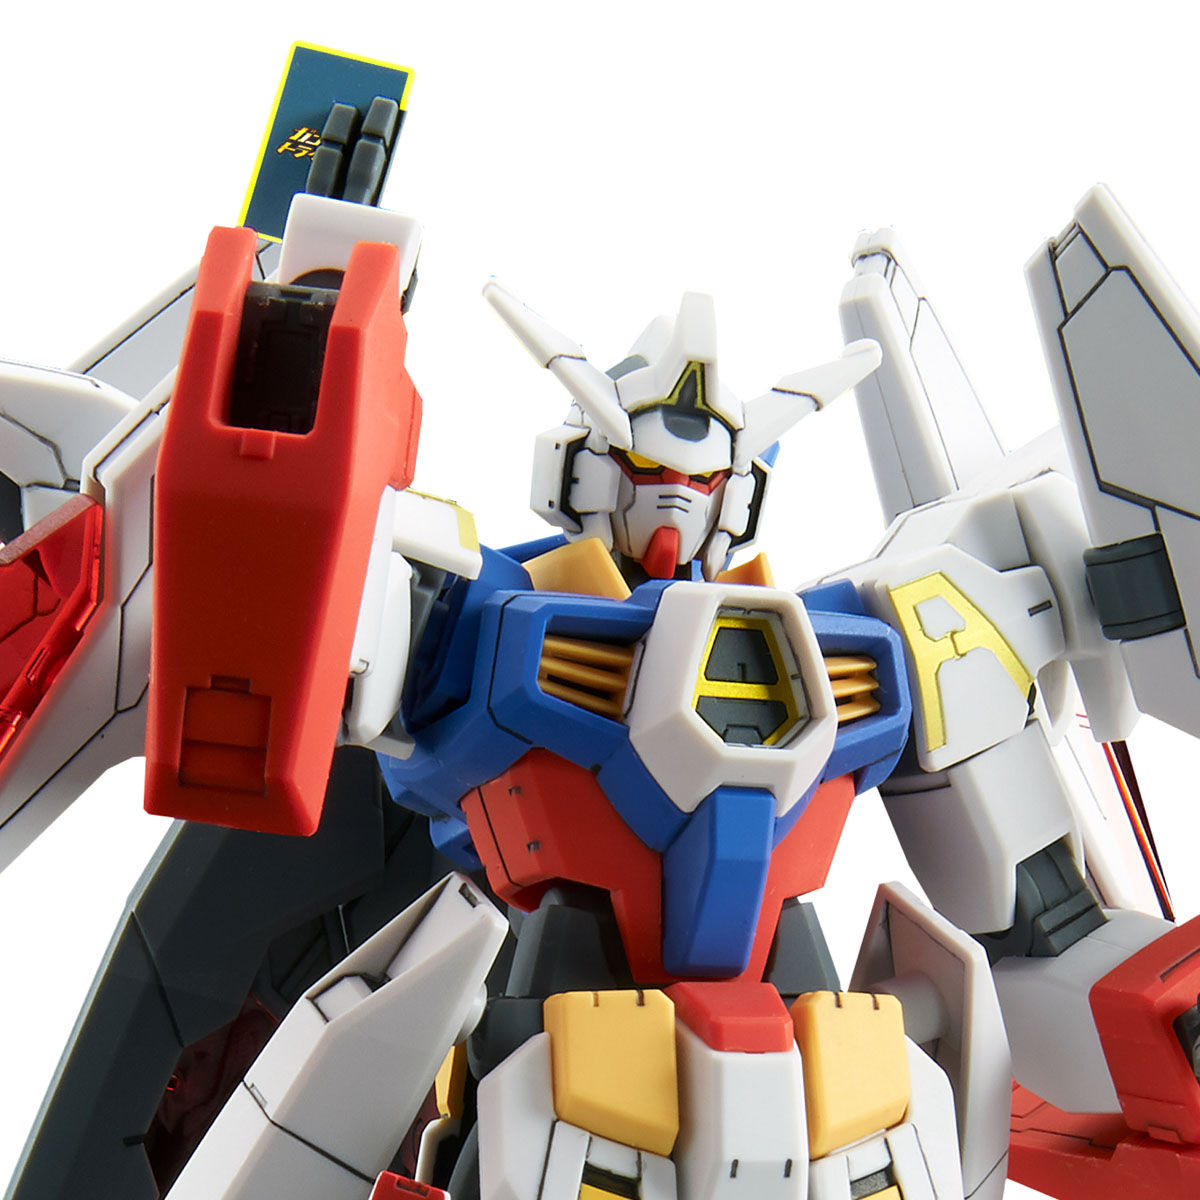 HG 1/144 AGE-TRY Gundam Try Age